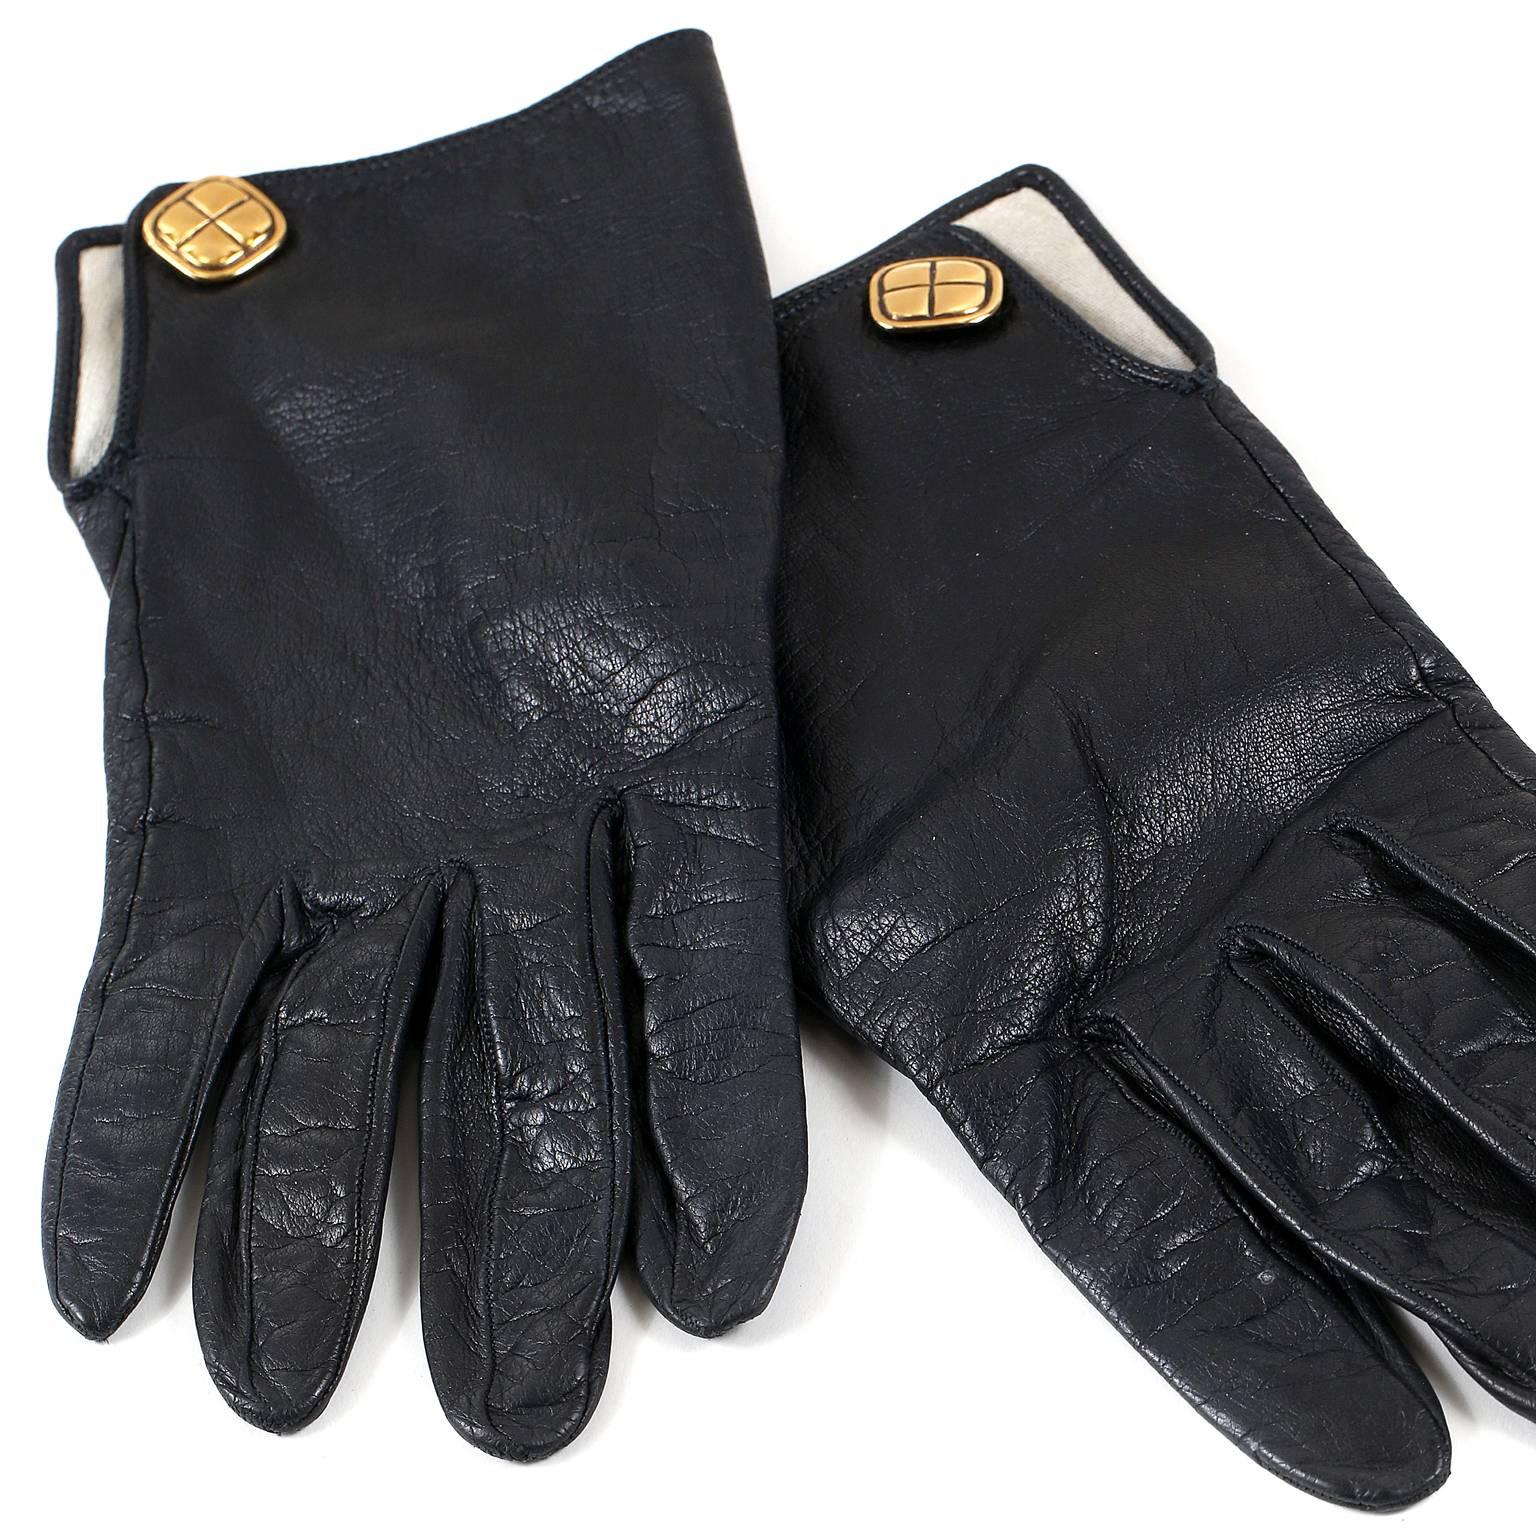 Chanel Black Leather Gloves are in excellent condition.  Simple and elegant, they are a great addition to any collection. 

Black leather lined ladies’ gloves with gold tone hardware.  Size 7.
A208